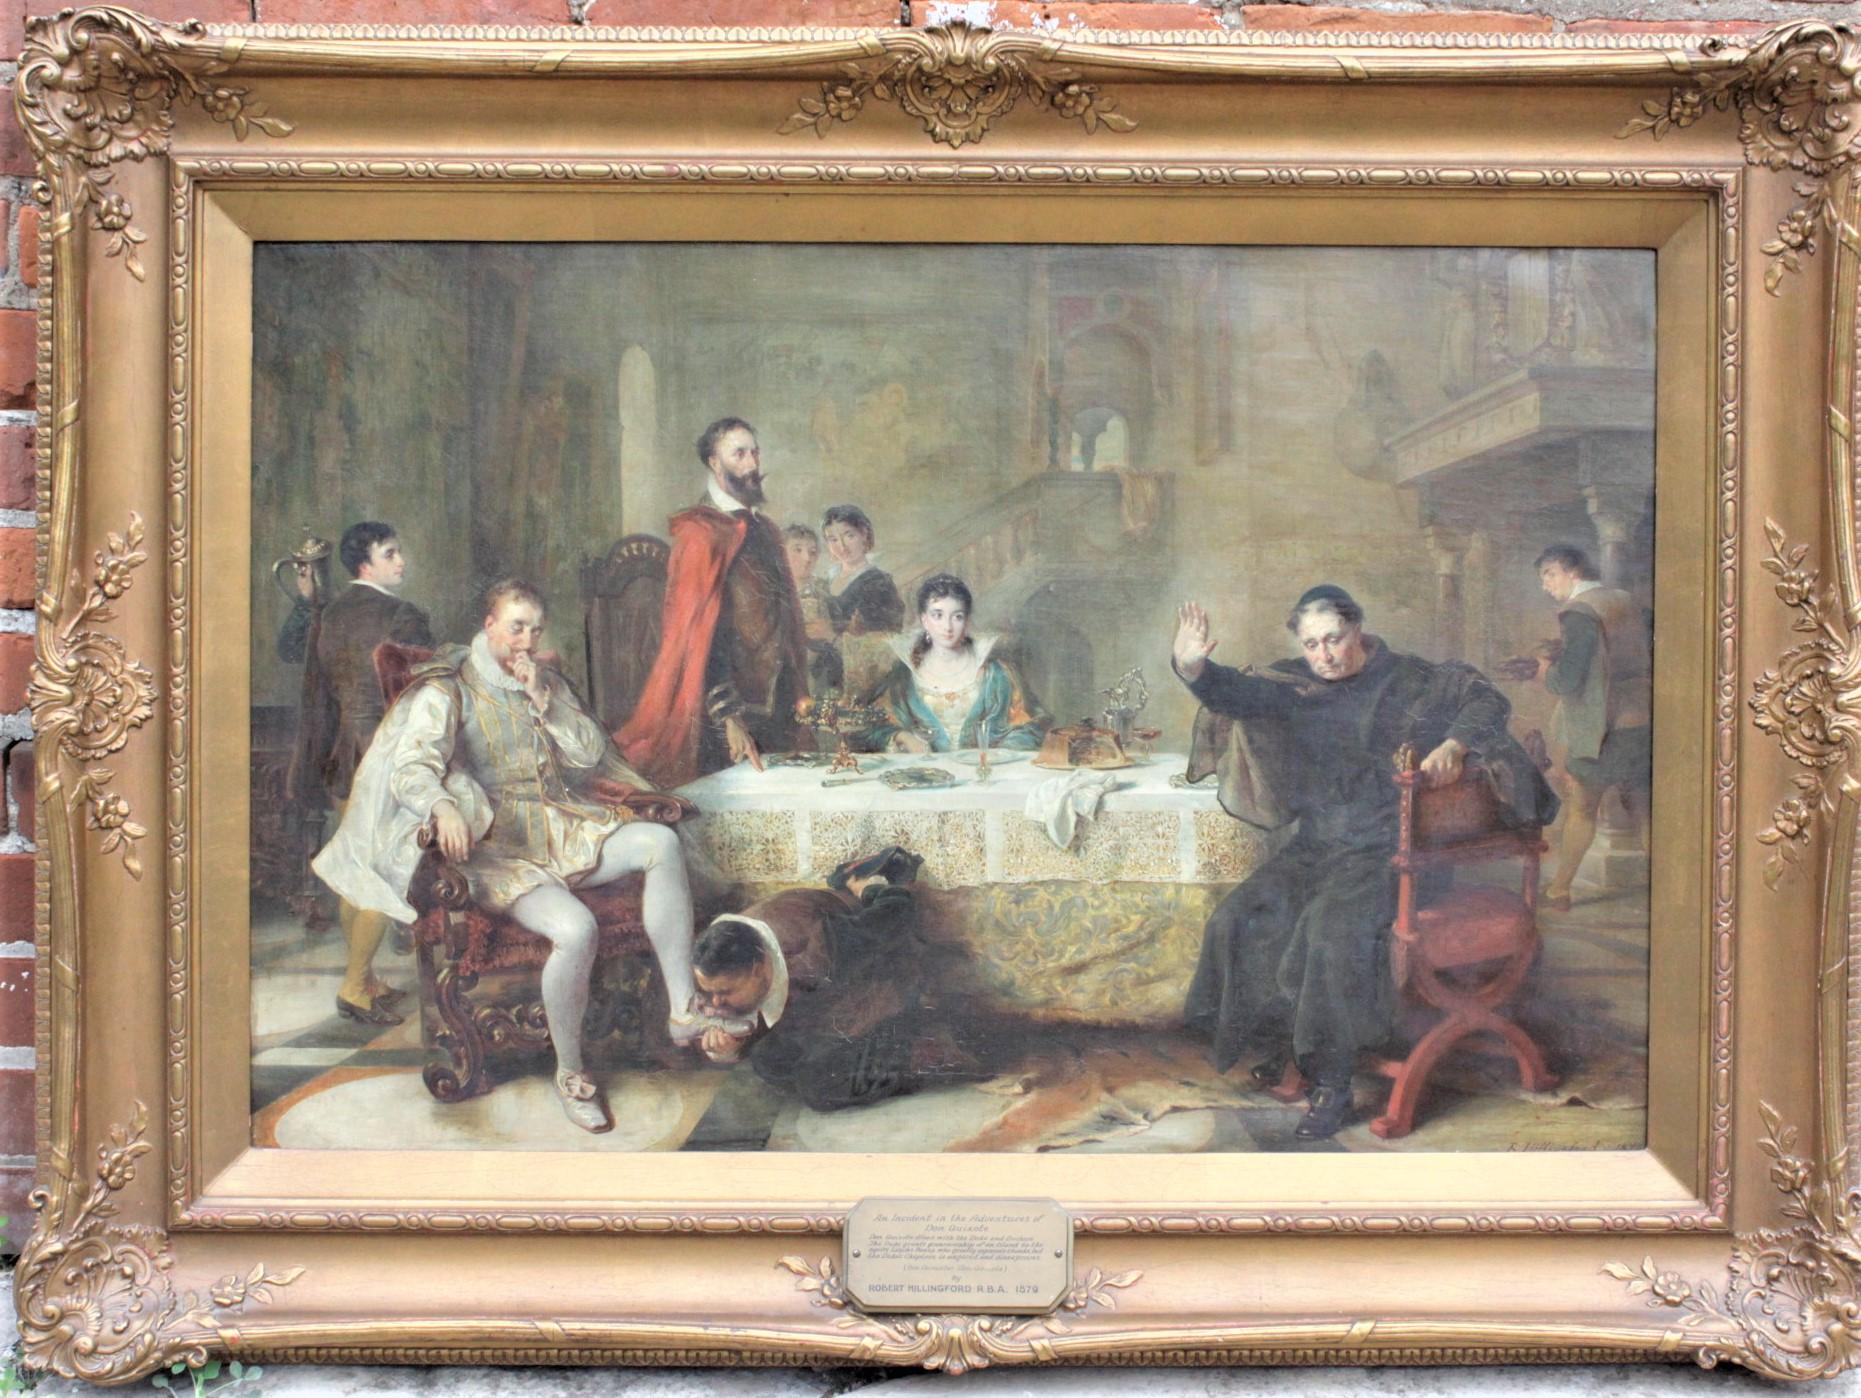 This very large and substantial antique oil painting was done by the well known British artist, Robert Hillingfprd in circa 1880 in the style of Realism. The painting is framed in its original and very ornate gilt gesso frame. The frame has a brass